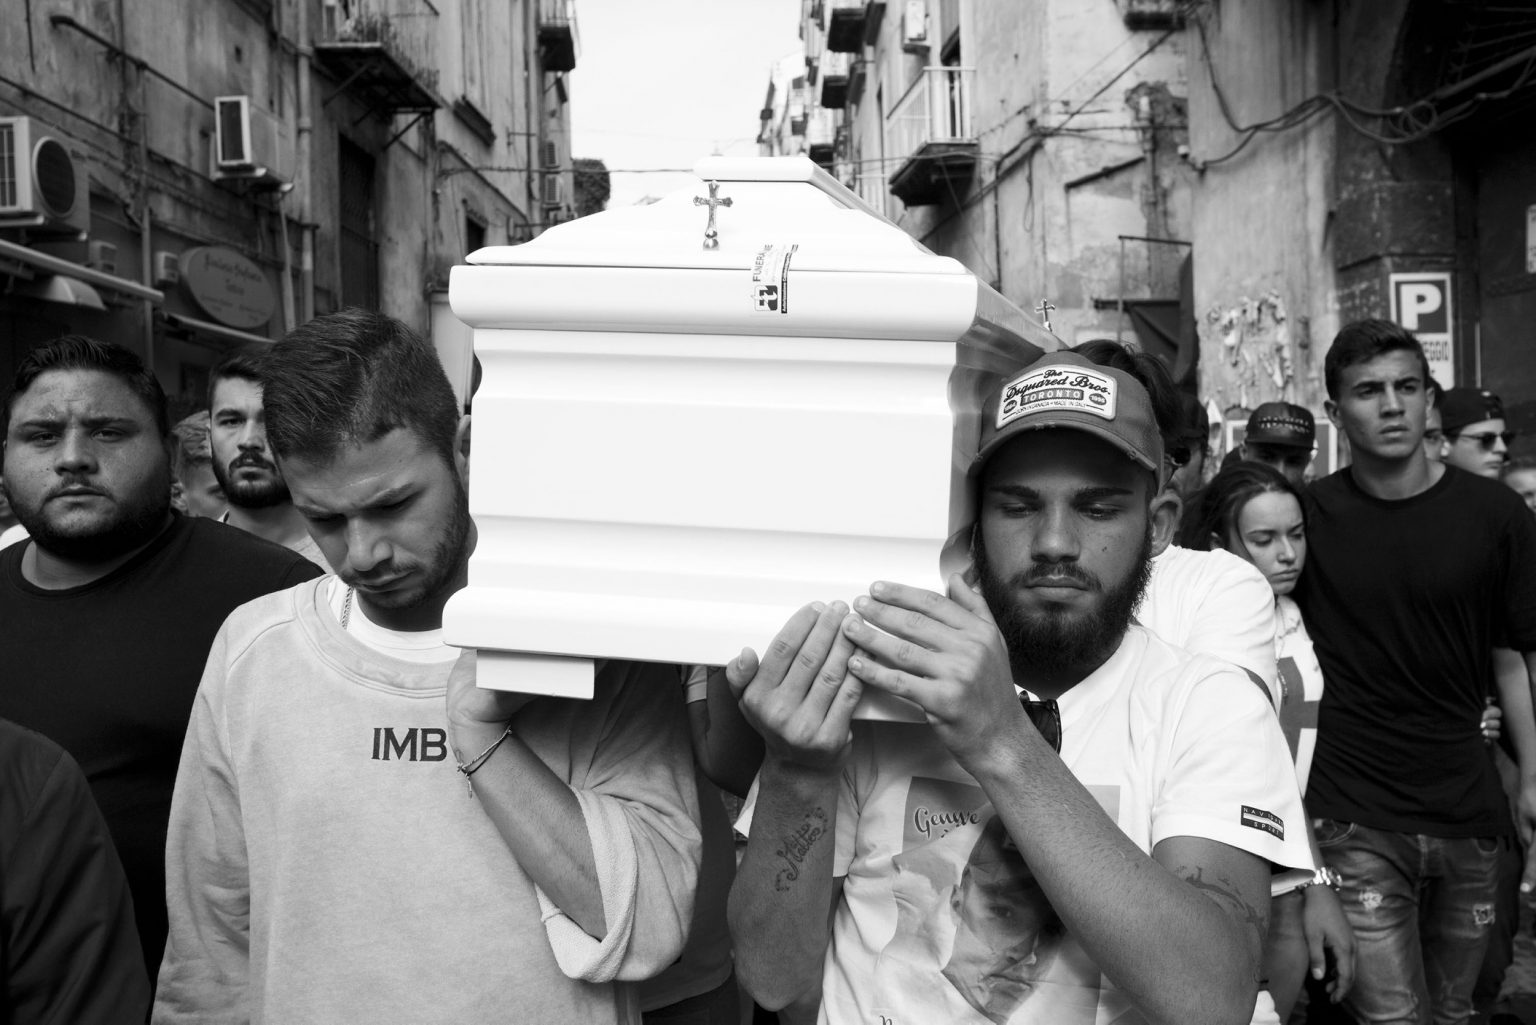 Genny Cesarano a 17 years old guy with previous convictions for robbery and possession of gun, was killed by a Camorra commando. The funeral of Genny, the friends bringing the coffin  in the streets of the quarter. Sanità neighborhood. Naples, Italy, 2015